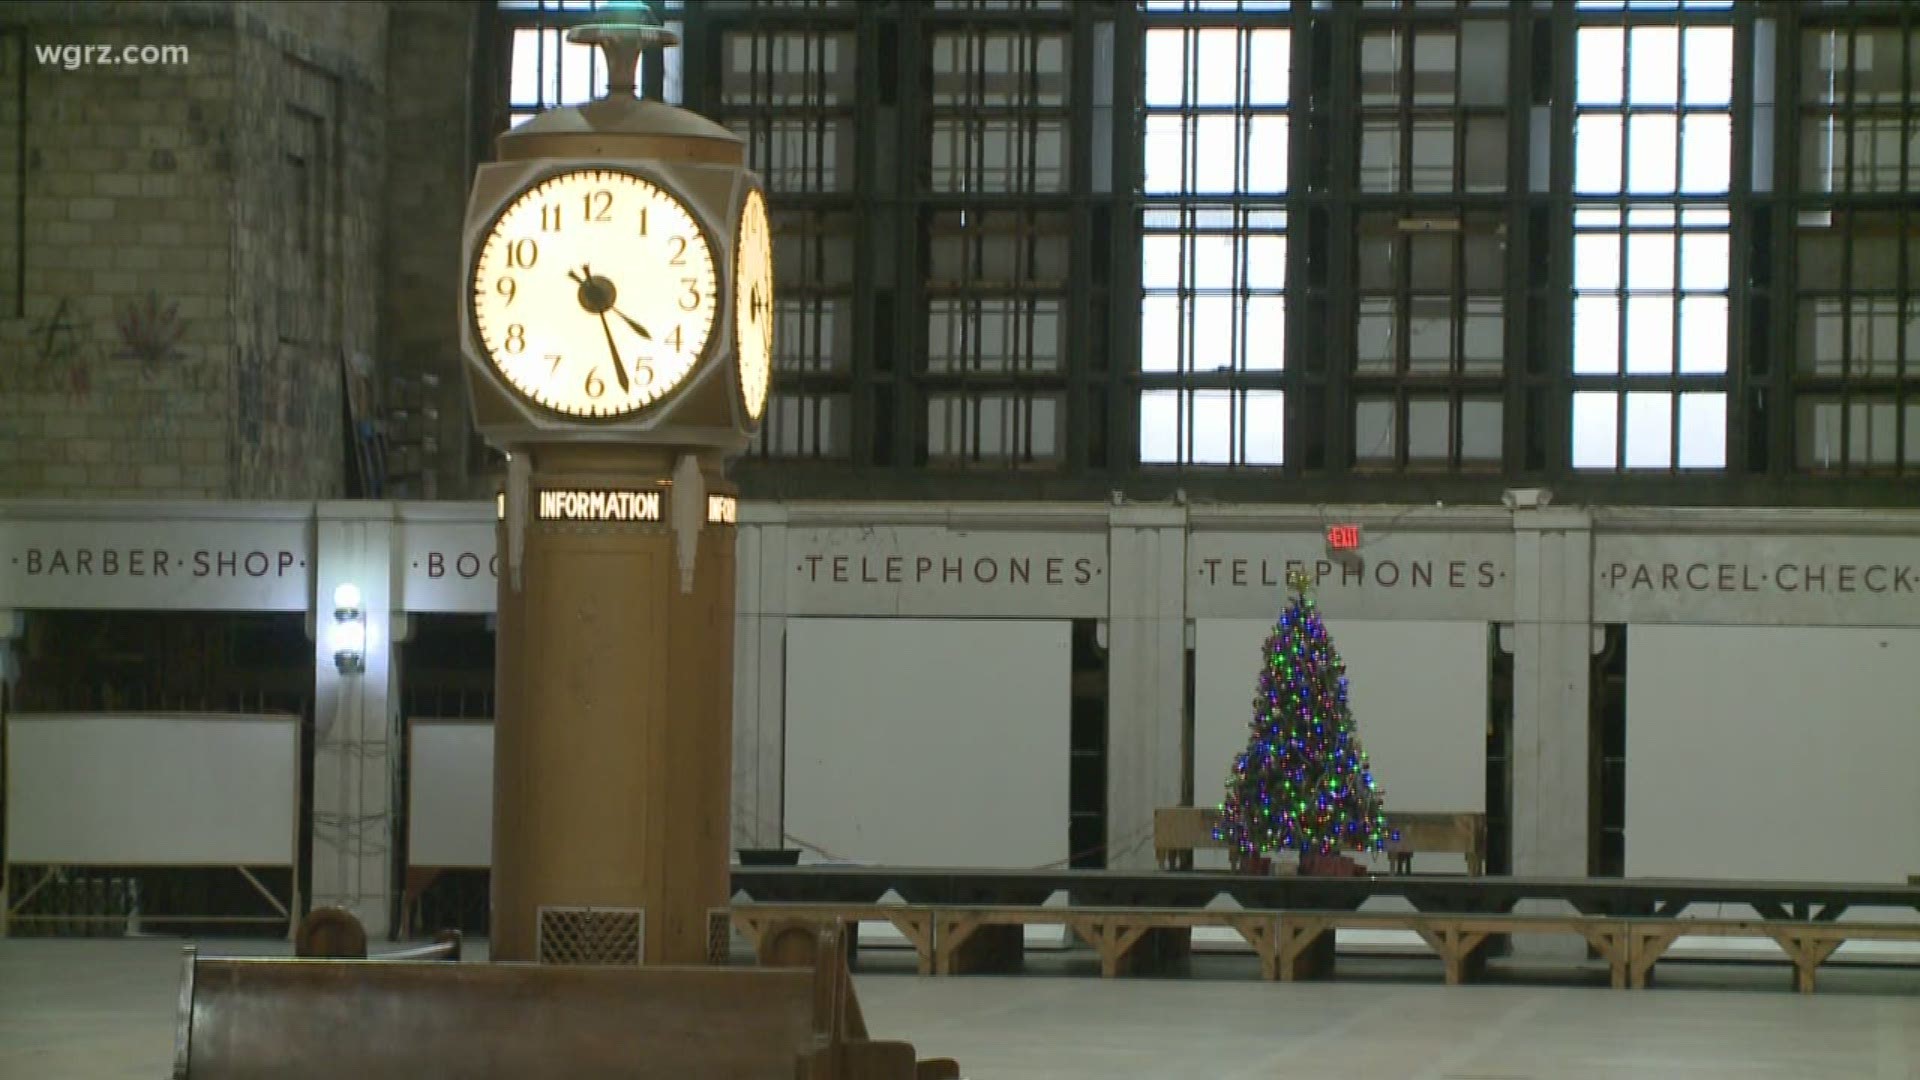 The project brought commercial-grade power back to the central terminal for the first time since it was decommissioned as a train station back in 1979.